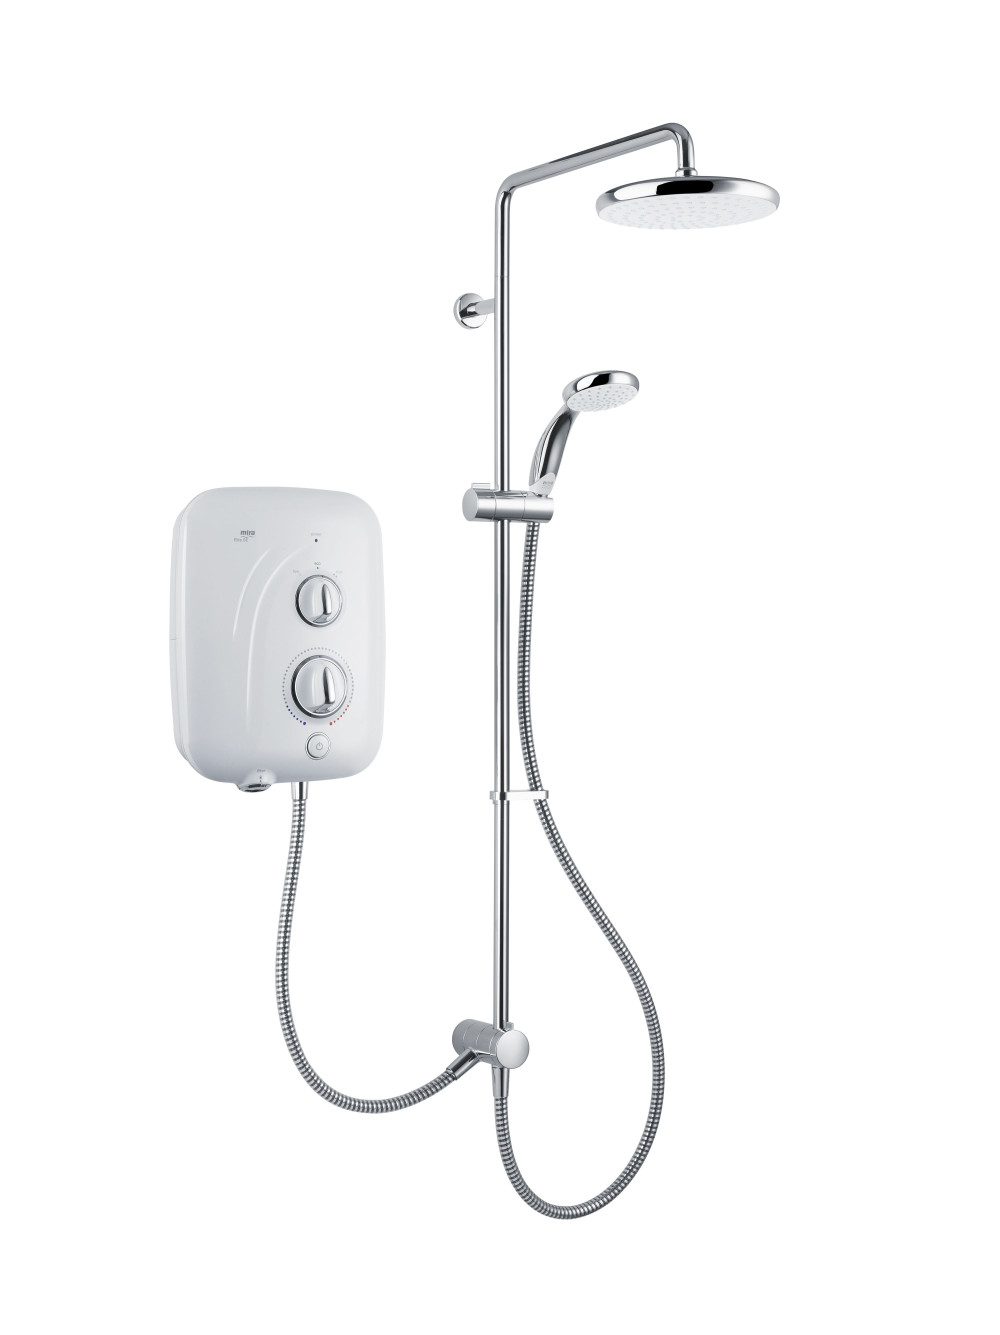 Mira Elite SE Dual Outlet Pumped Electric Shower featured image